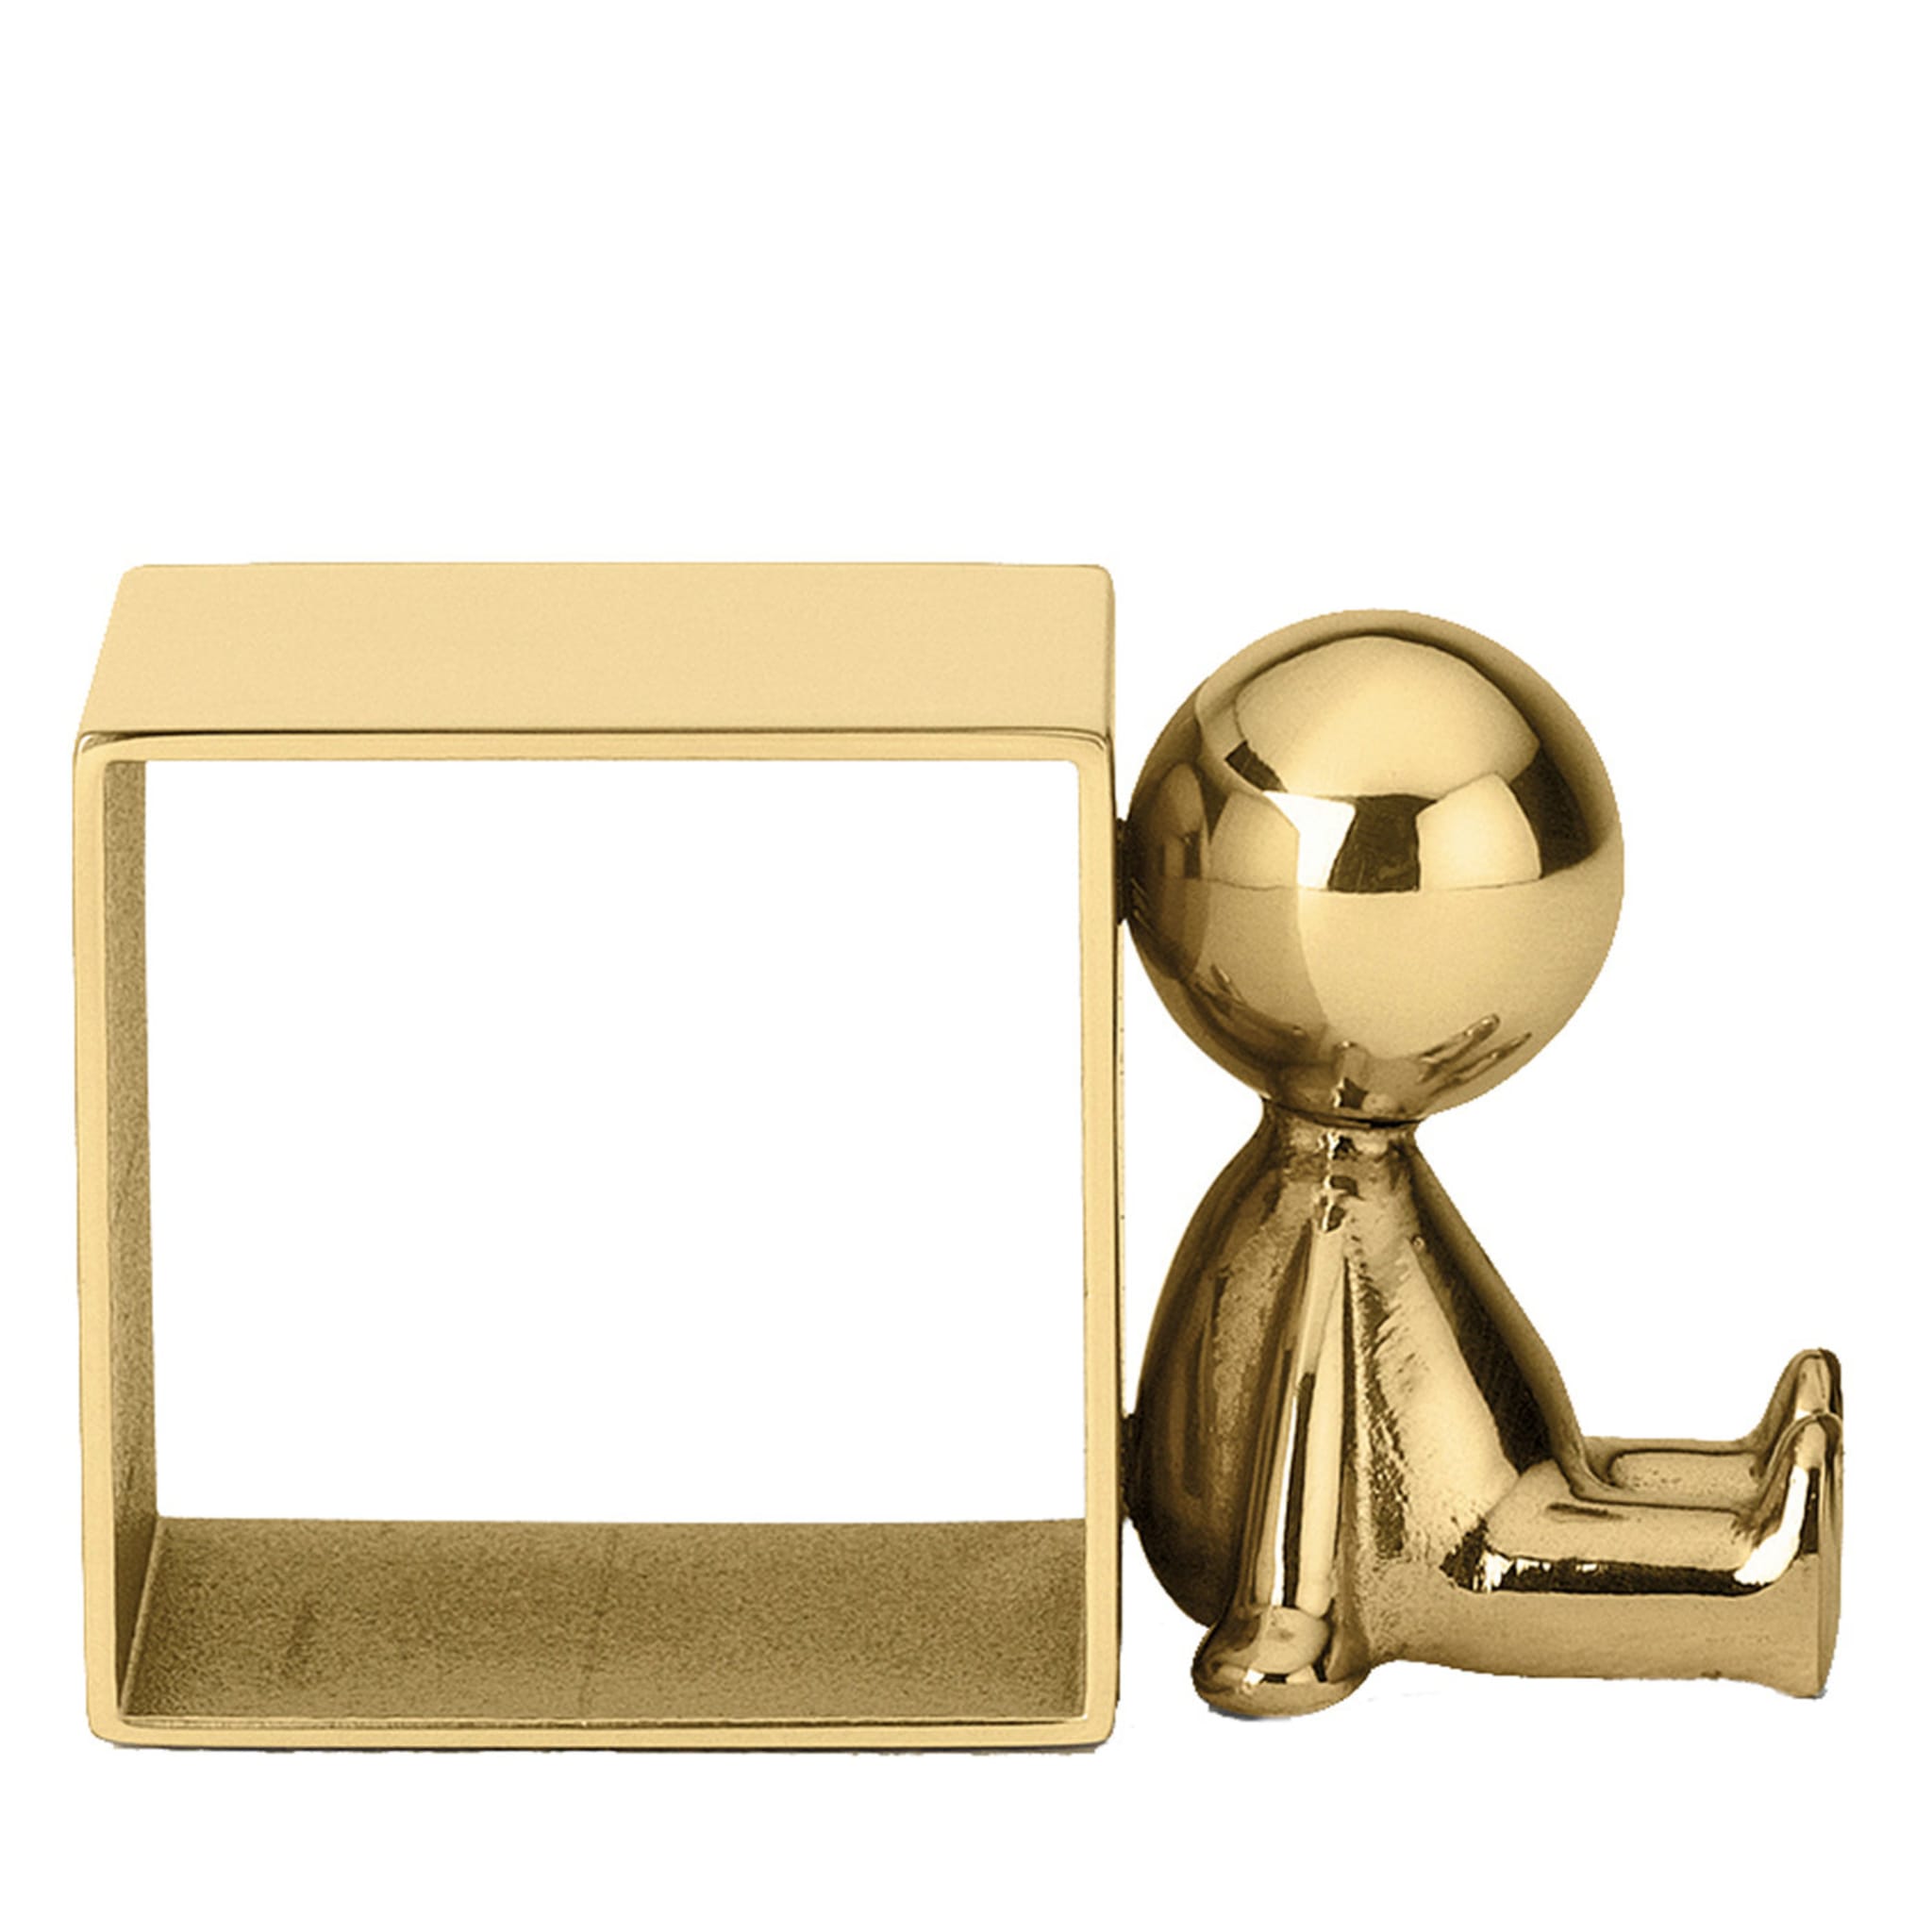 Omini Side Napkin Ring in Polished Brass By Stefano Giovannoni - Main view